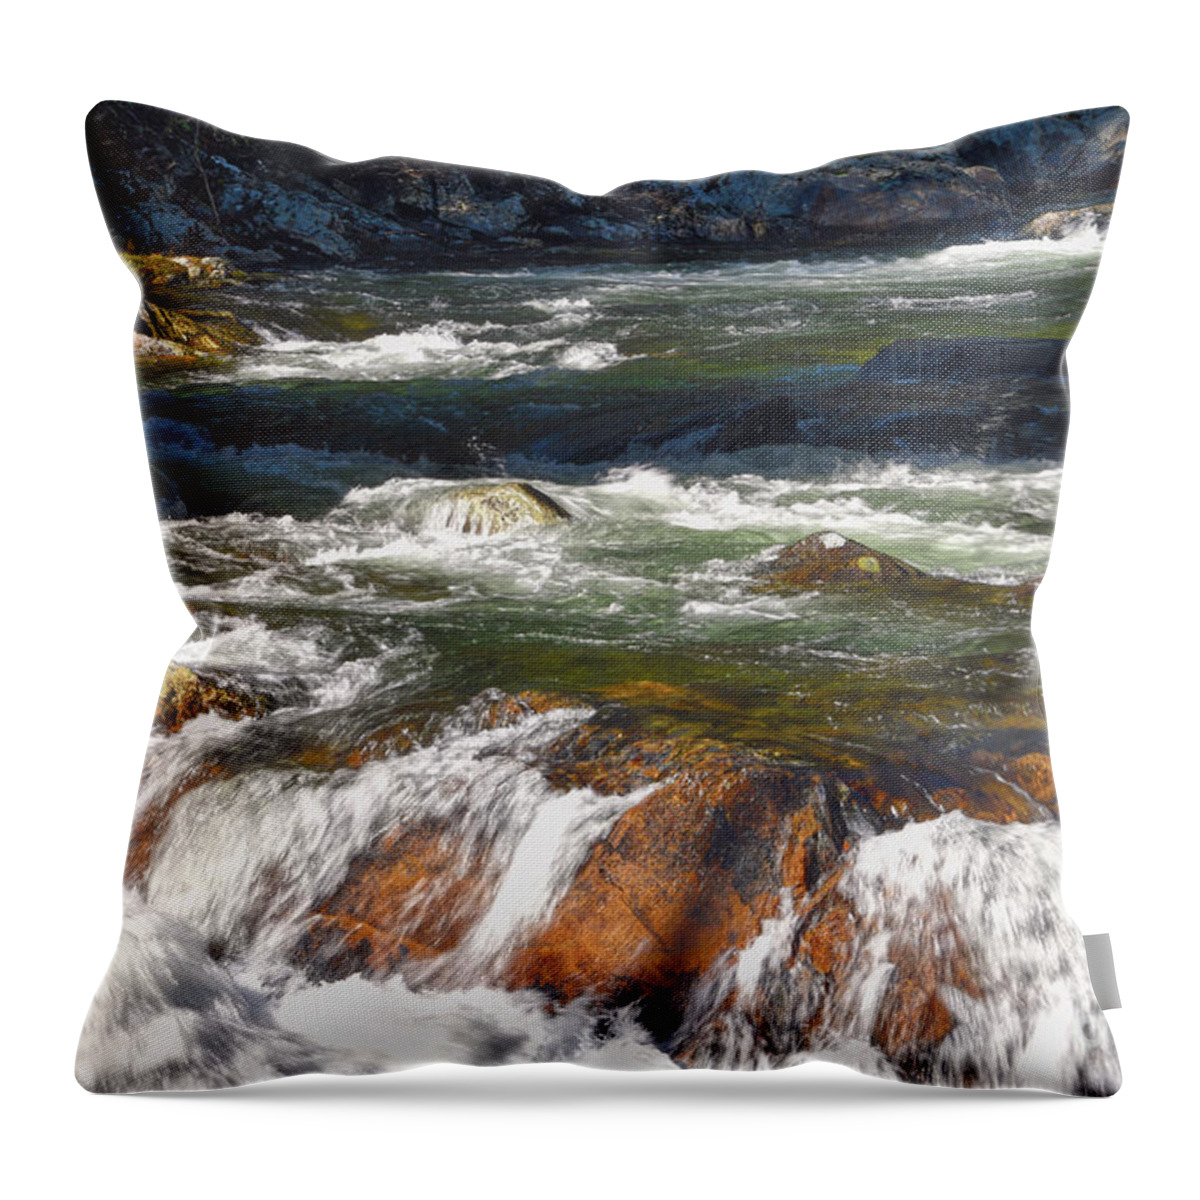 Tennessee Throw Pillow featuring the photograph The Sinks by Phil Perkins